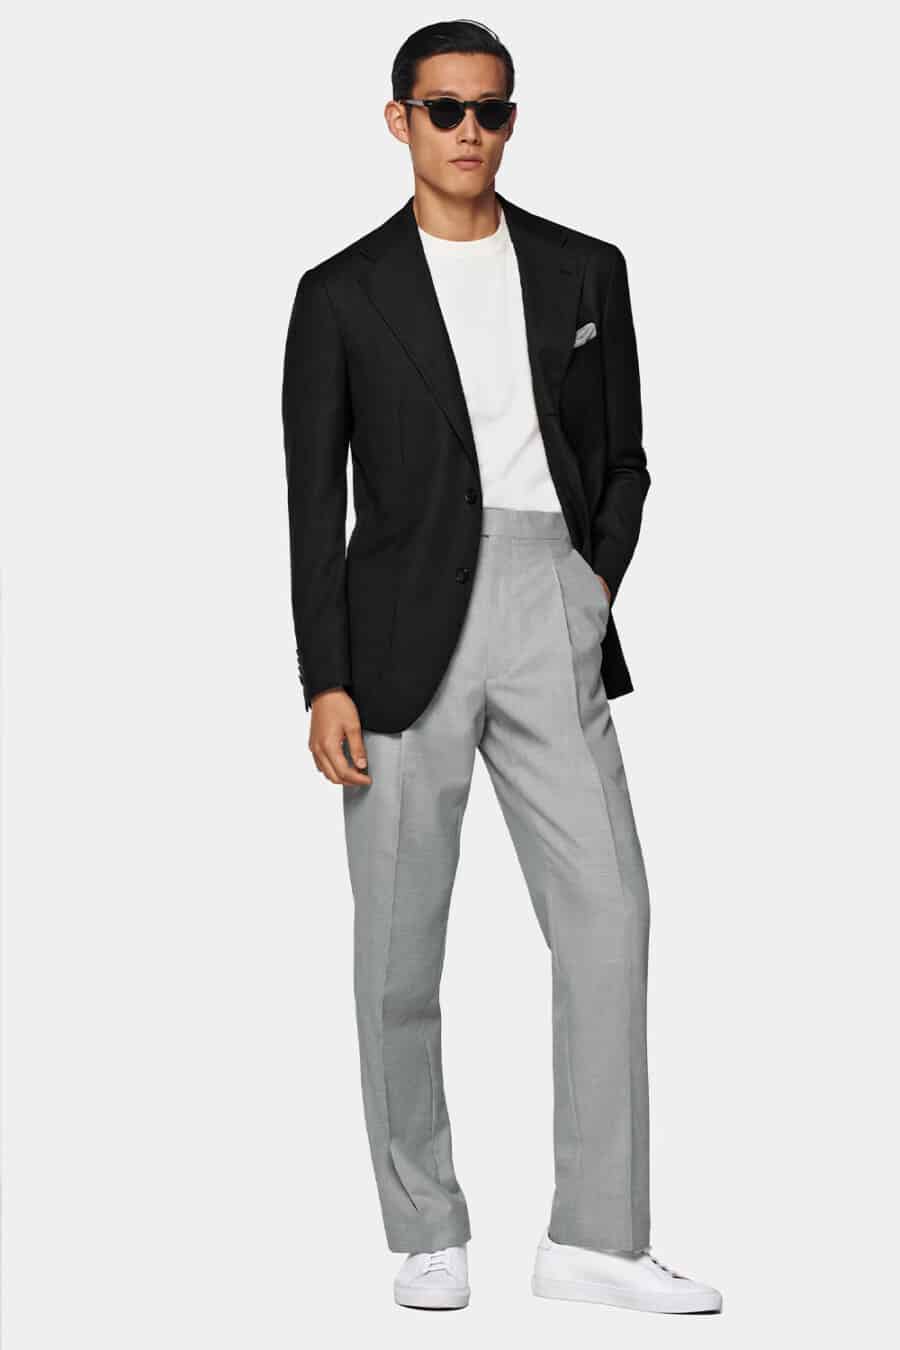 Men's light grey pants, white T-shirt, black blazer, round lens sunglasses and white sneakers outfit